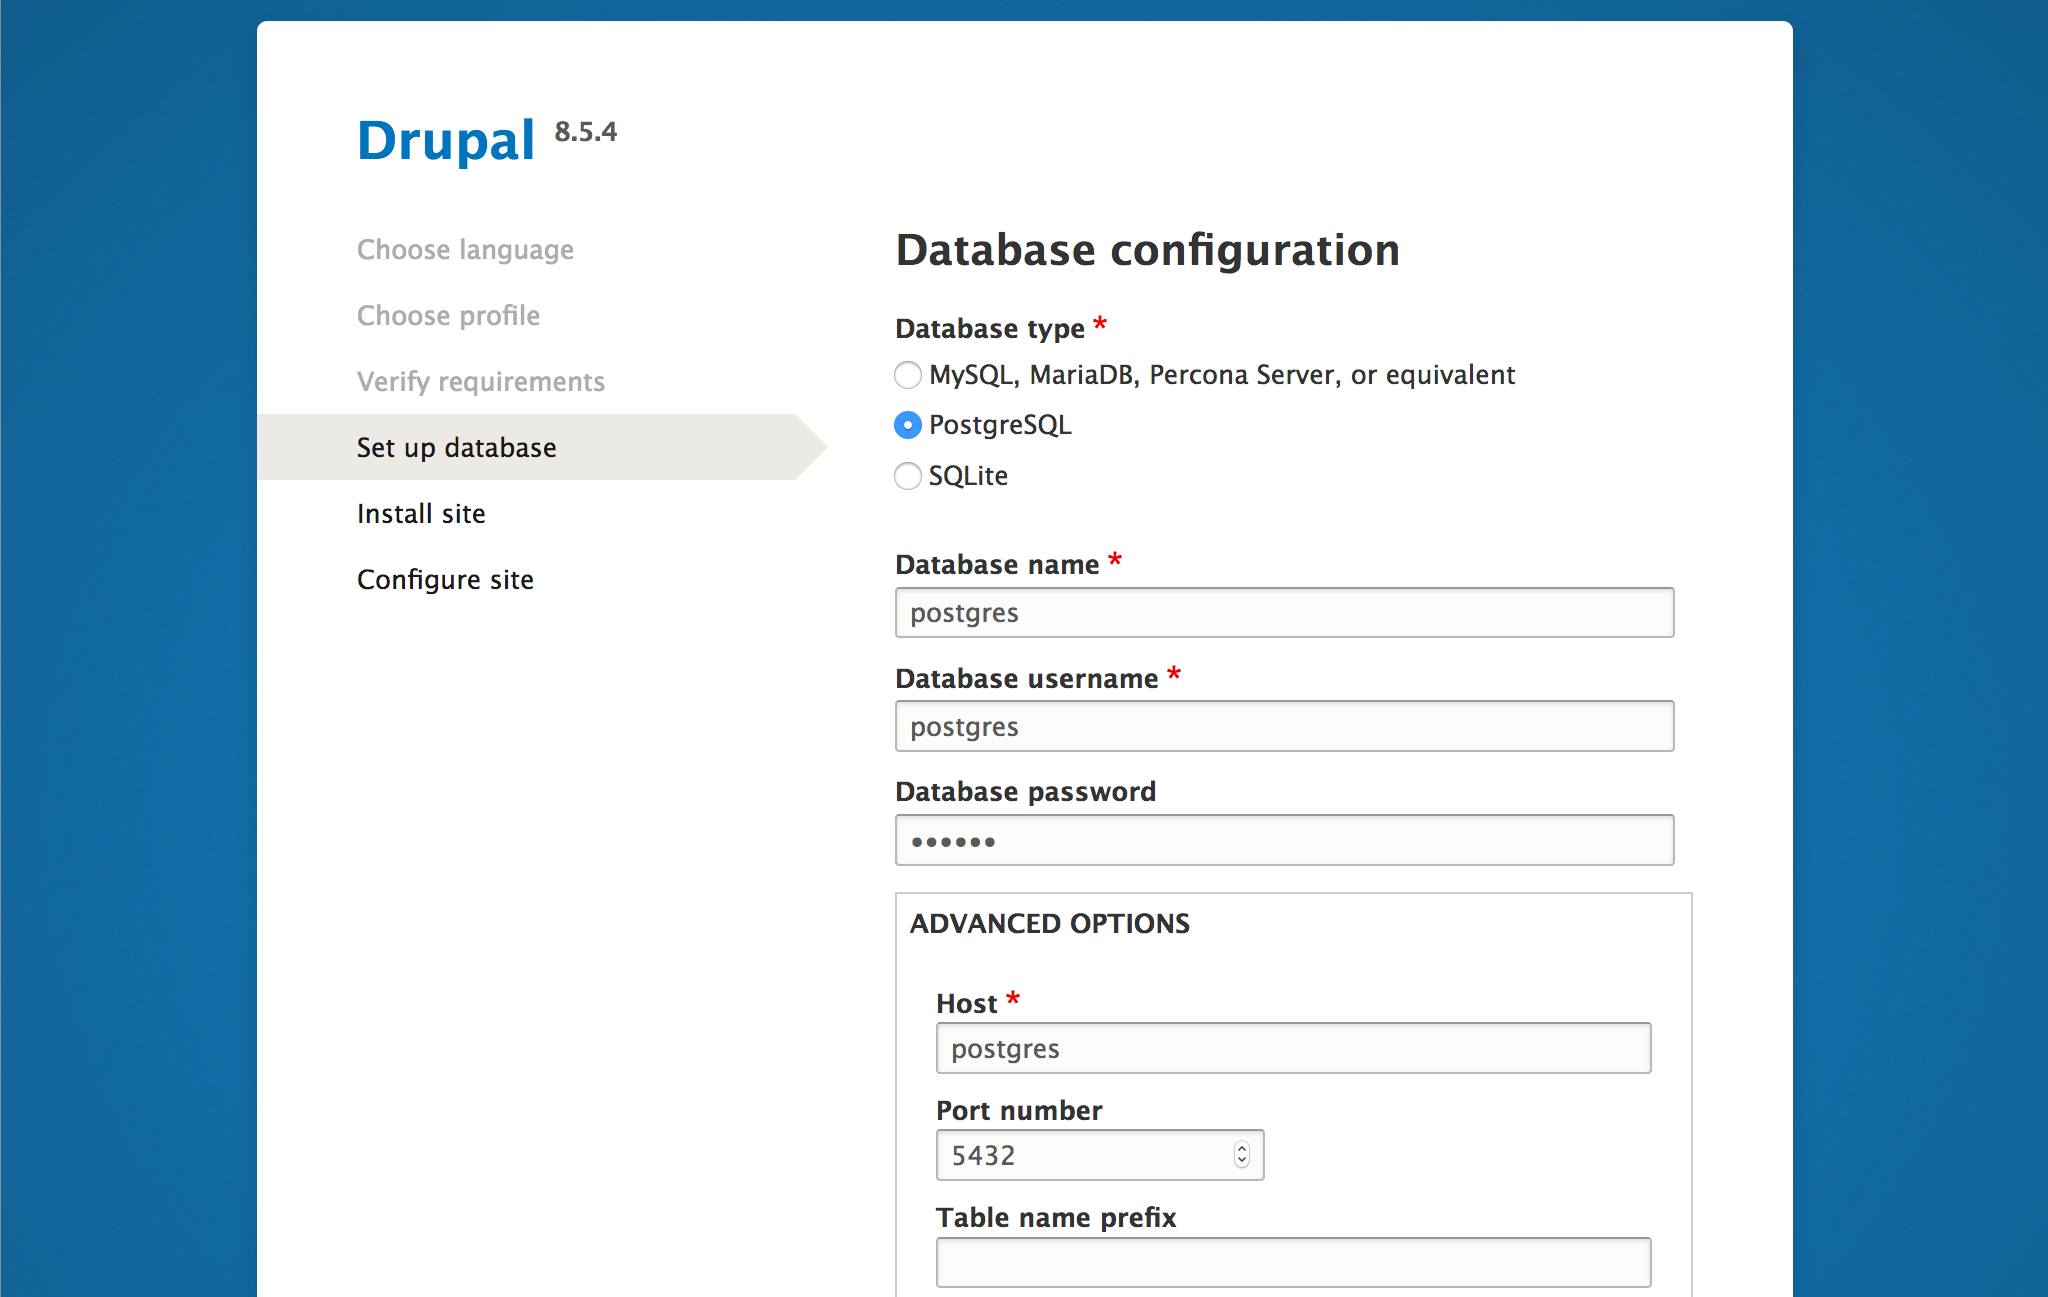 Drupal setup screen in the web browser - &lsquo;Set up database&rsquo; page